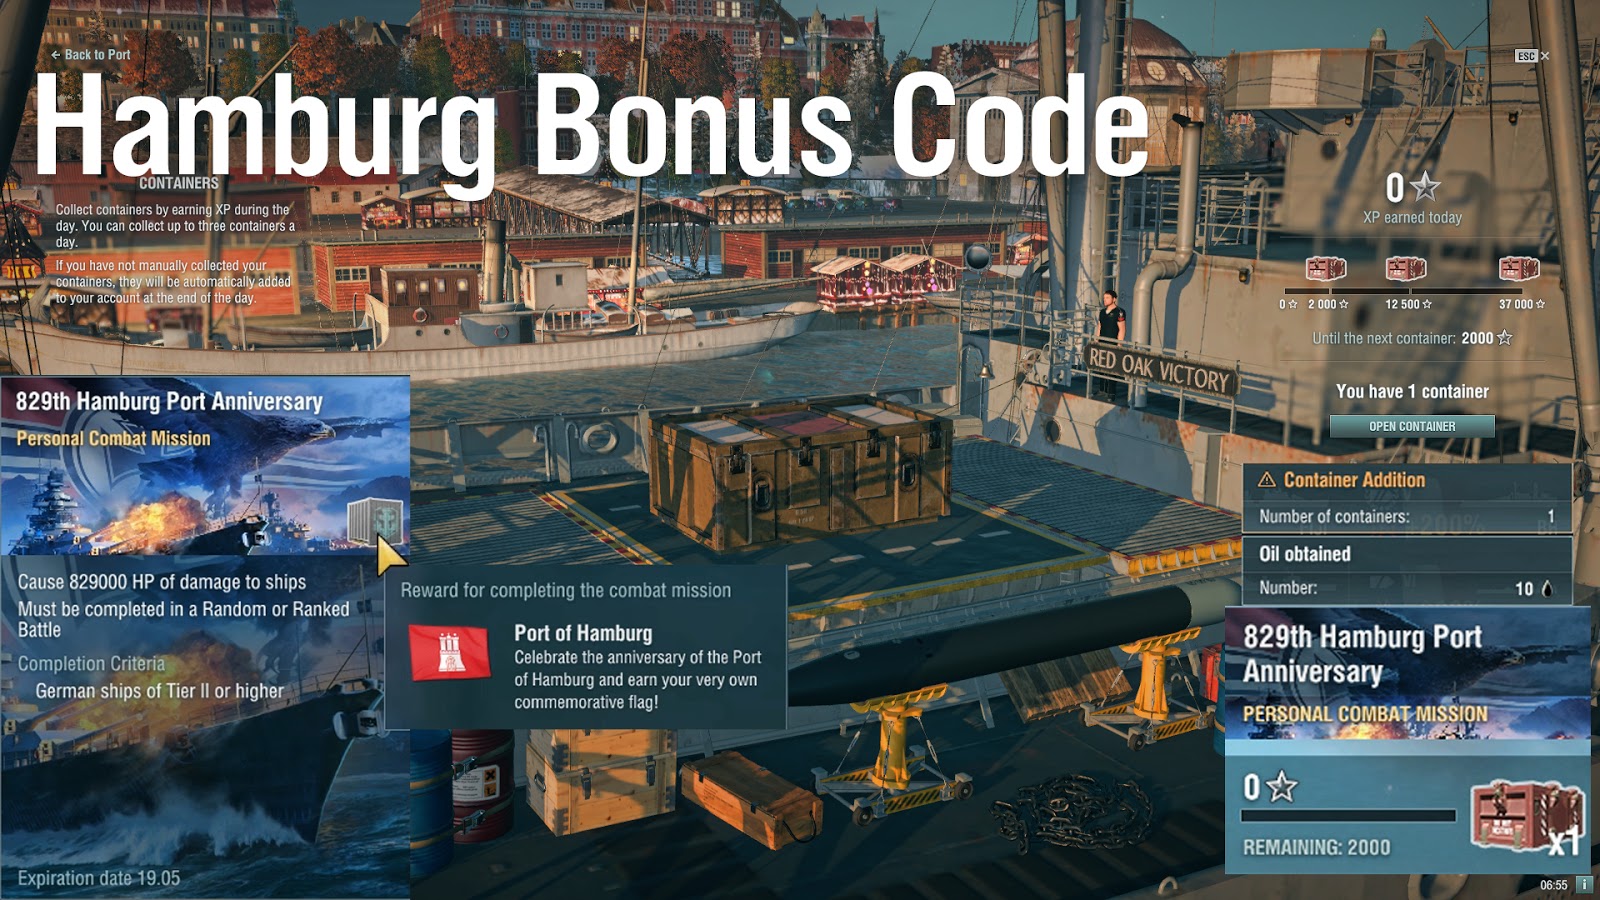 how do you redeem a code in world of warships?